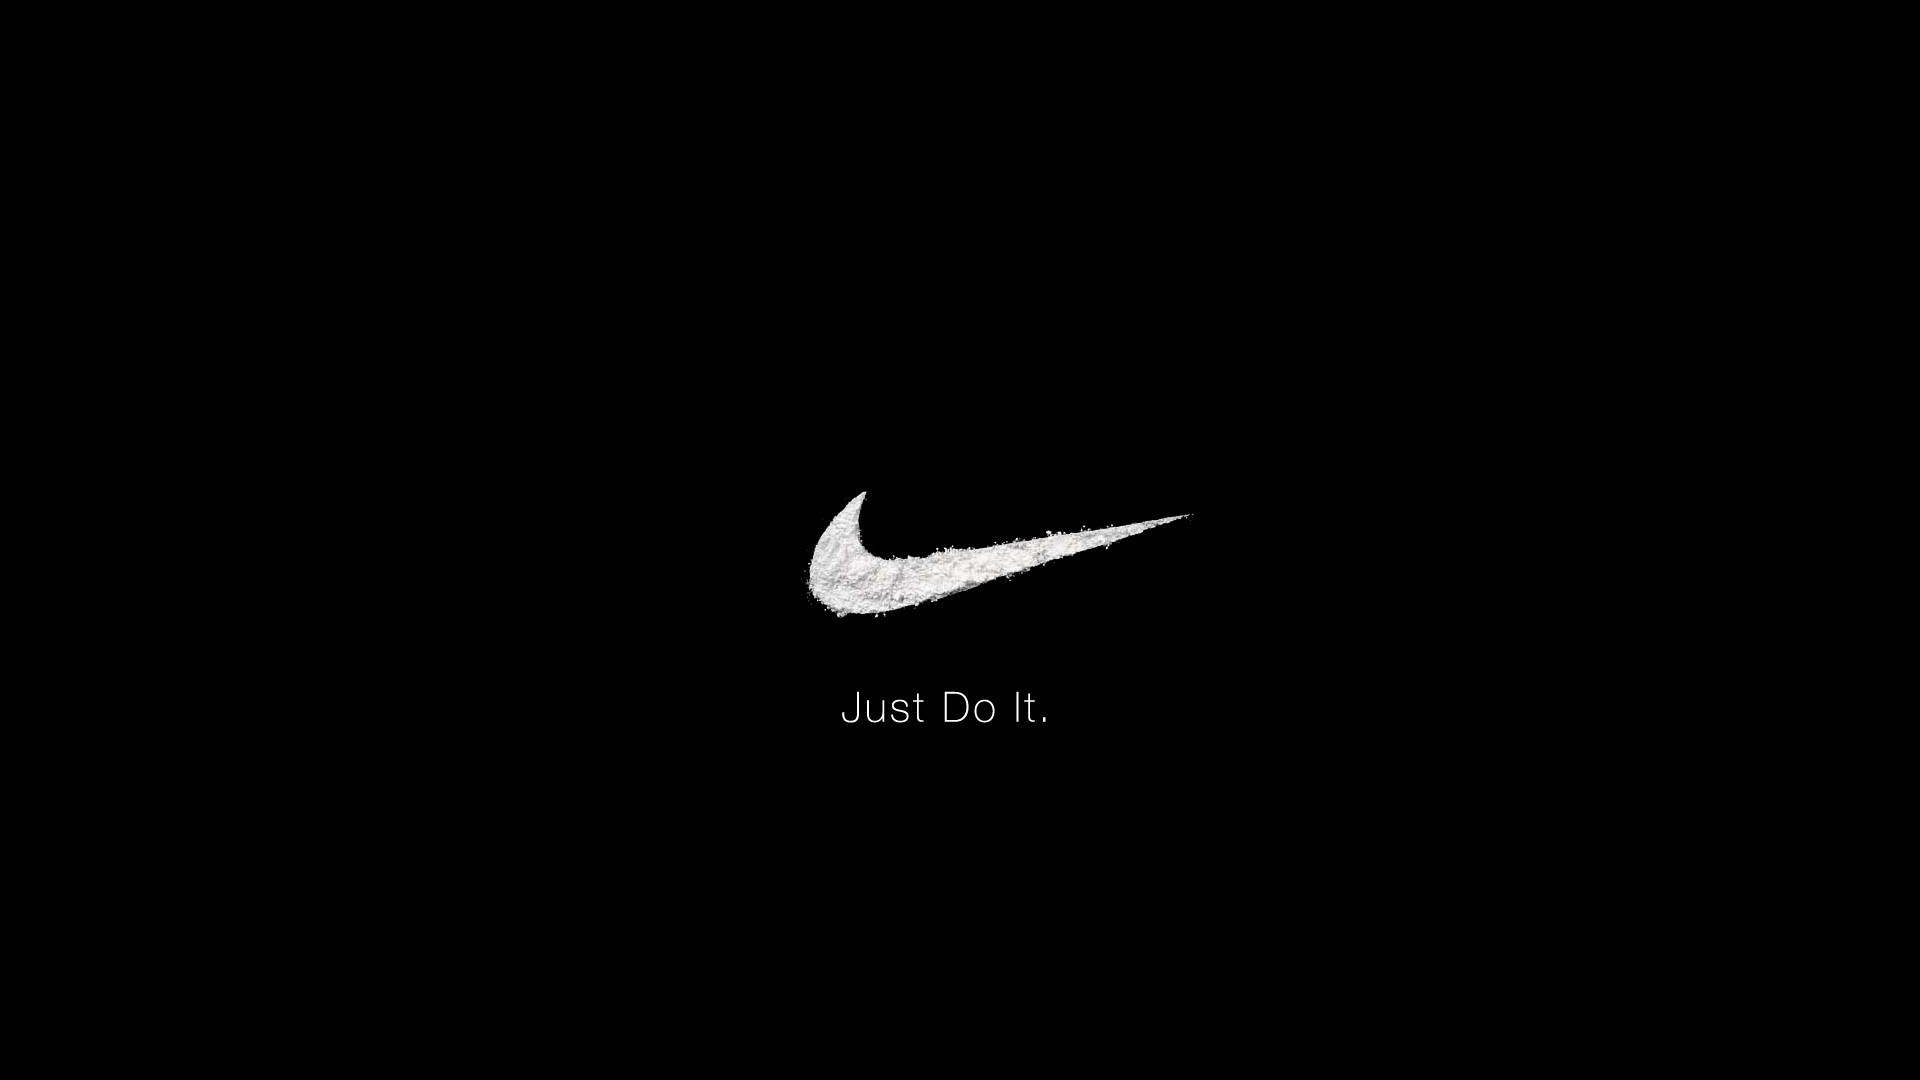 Free Download Nike Wallpapers Full Hd Just Do It 1920x1080 For Your Desktop Mobile Tablet Explore 72 Nike Symbol Wallpaper Bat Symbol Wallpaper Cool Nike Wallpapers Superman Symbol Wallpaper